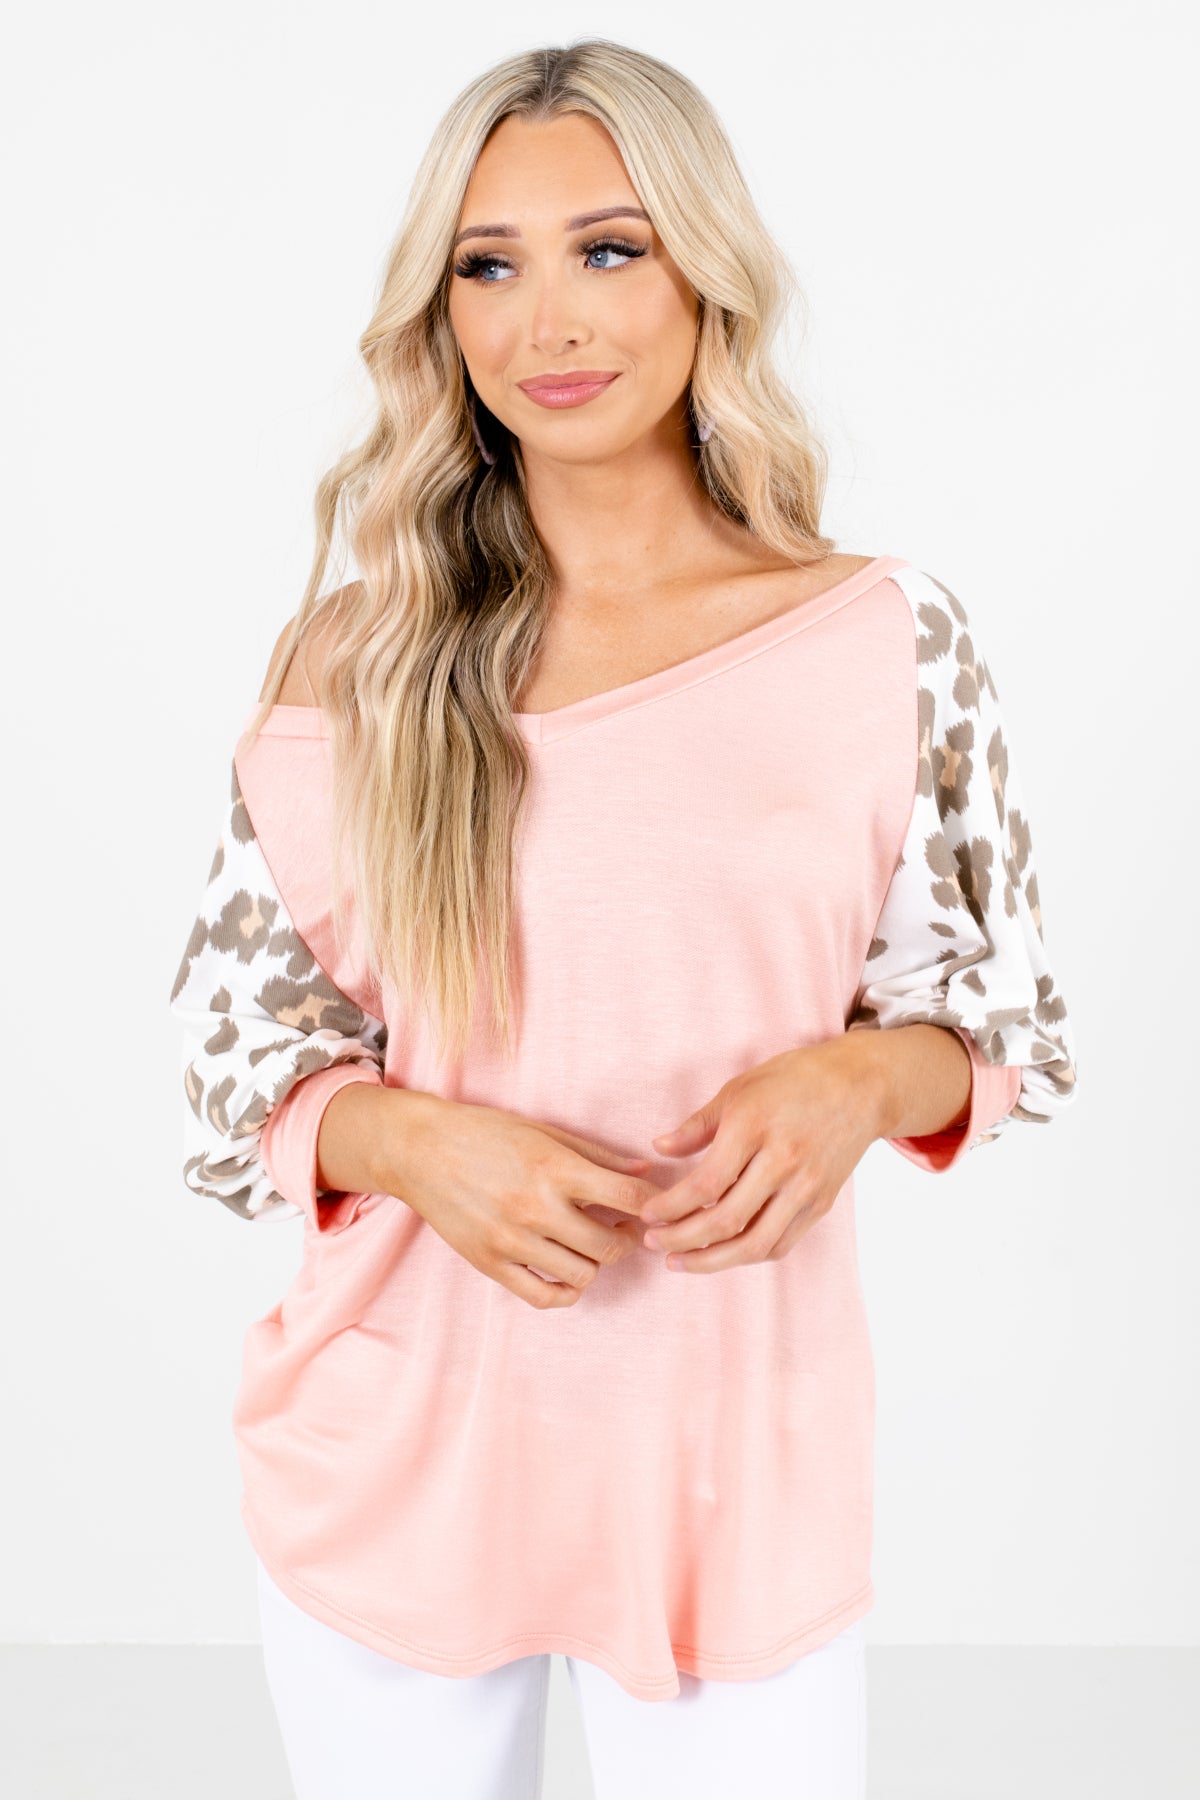 Pink Leopard Print Patterned Boutique Tops for Women